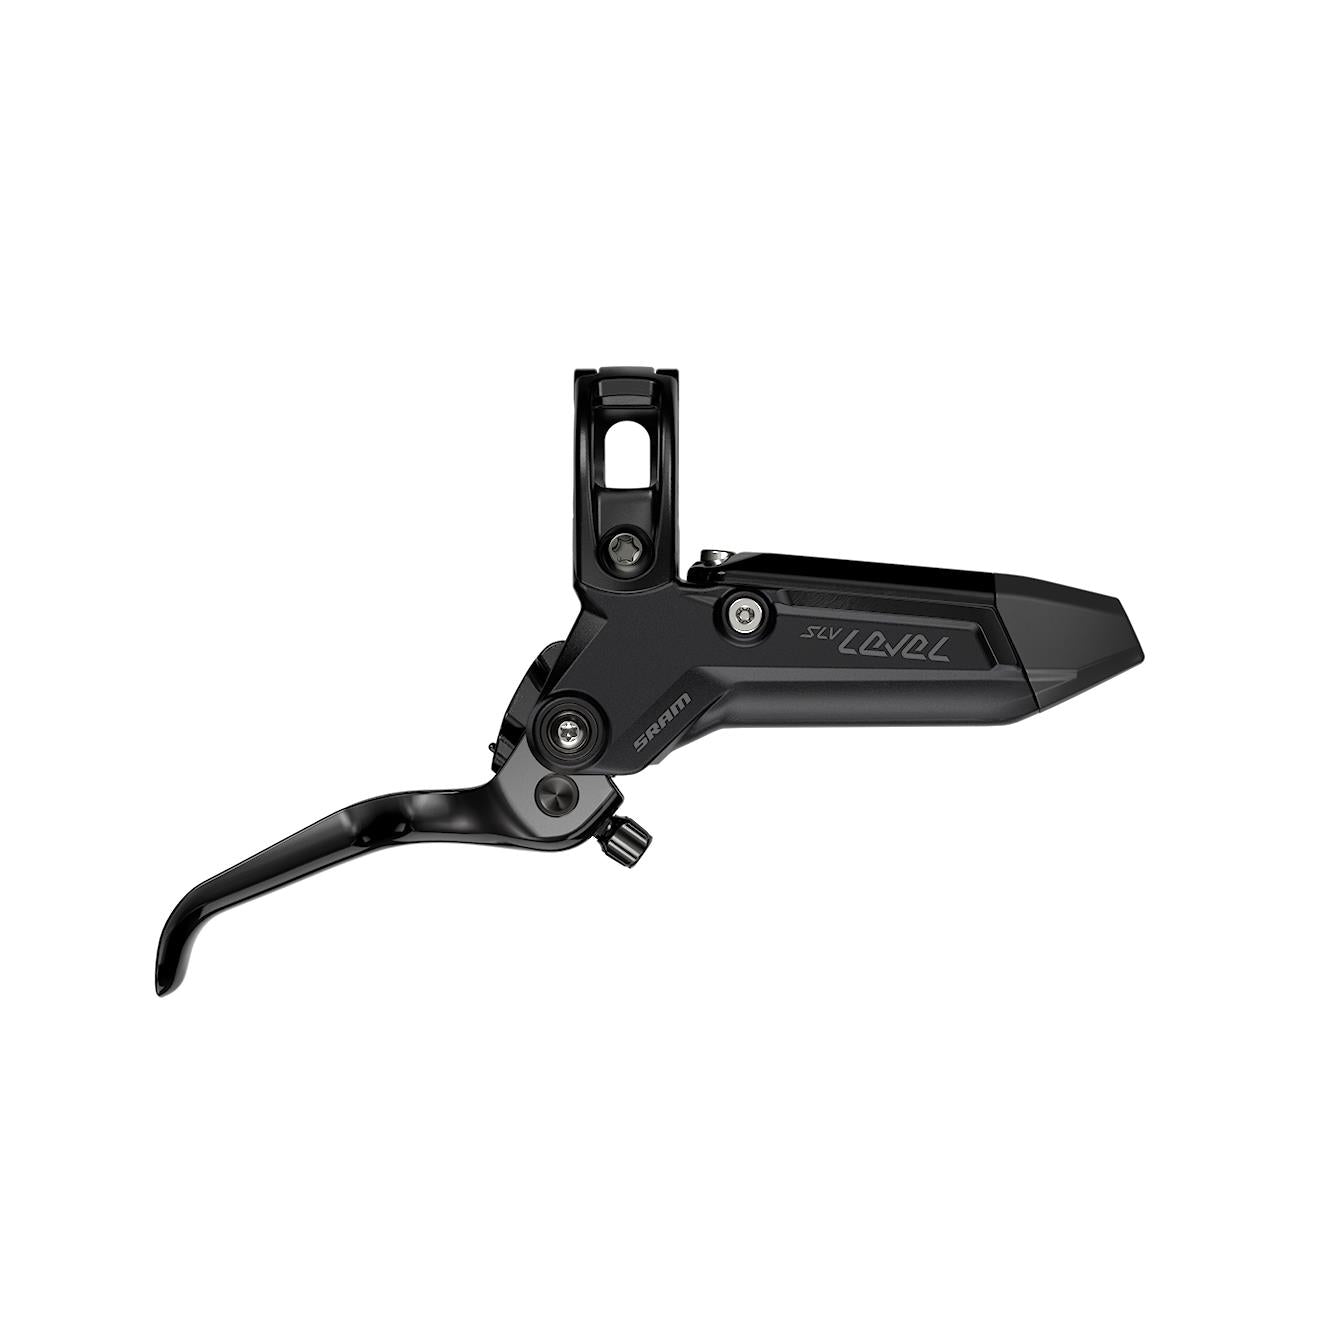 SRAM Disc Brake Level Silver Stealth 2 Piston - Aluminum Lever, Stainless Hardware, Reach Adj, Rear Hose (Includes mmx Clamp, Rotor/Bracket Sold Separately) C1 Black Ano 2000MM